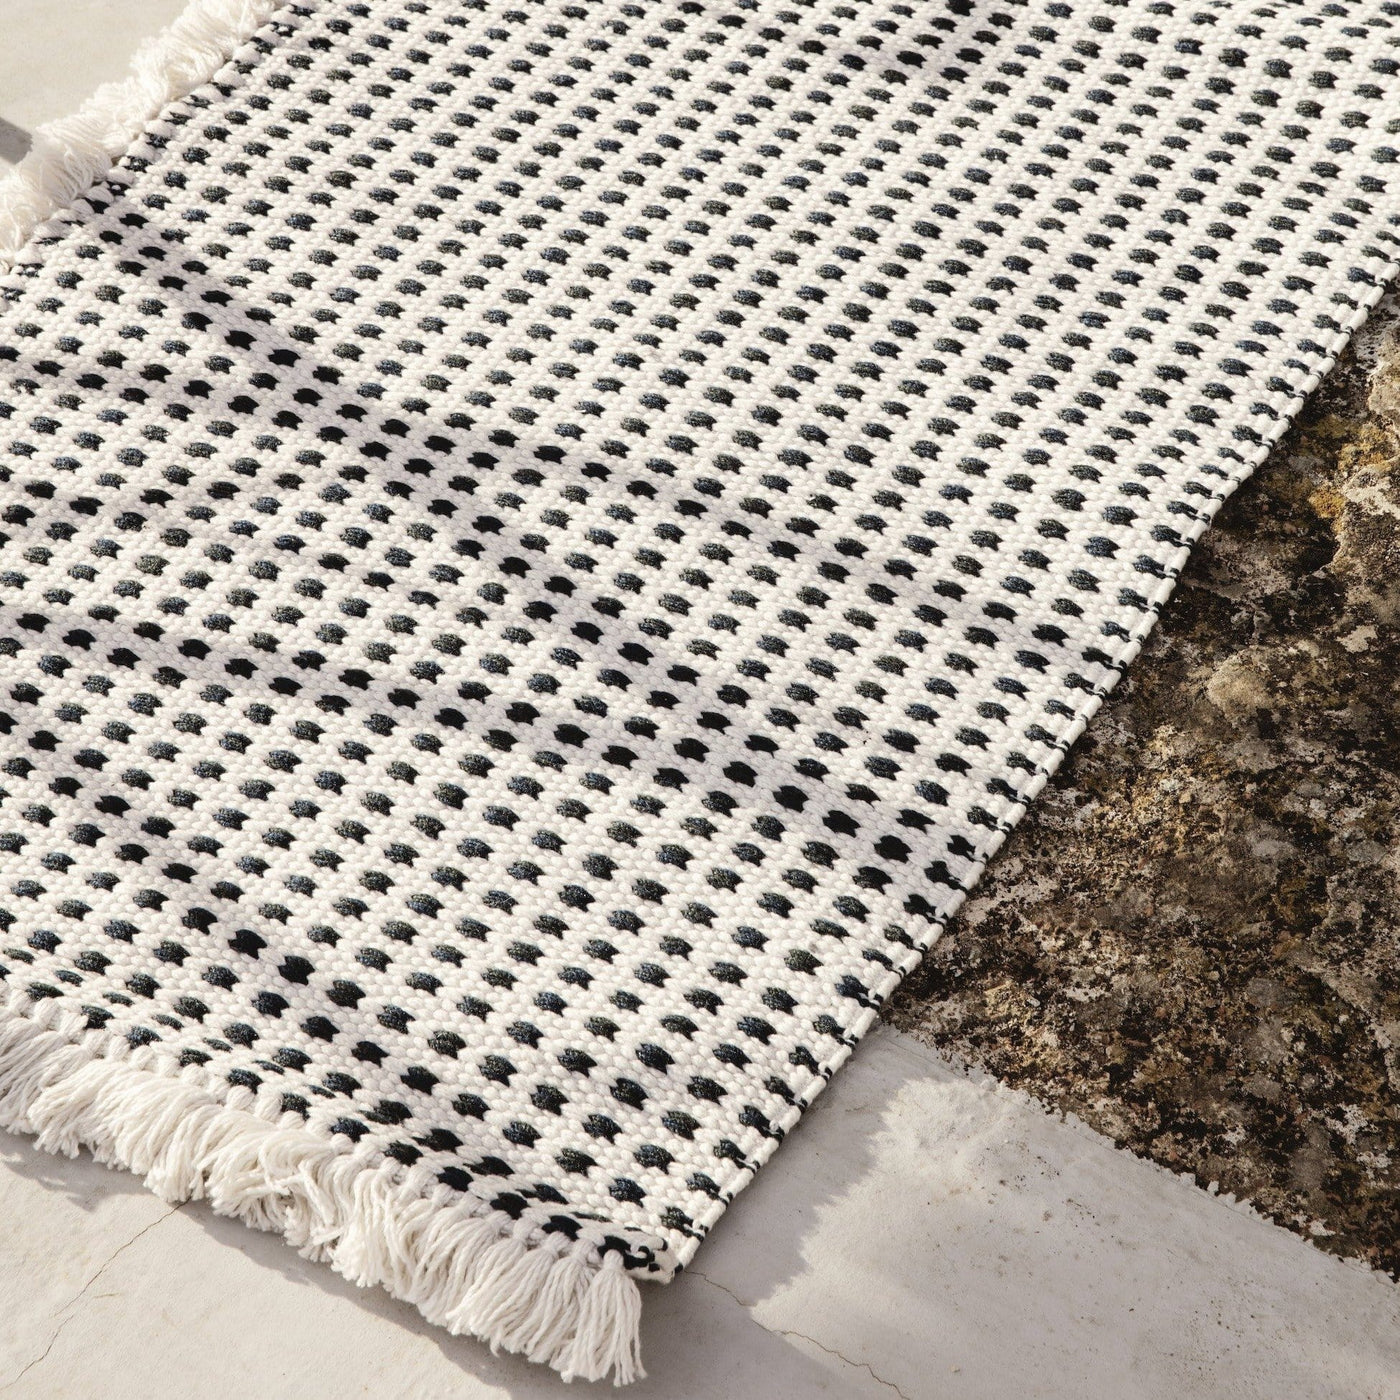 Ferm Living Way Rug. Buy now at someday designs